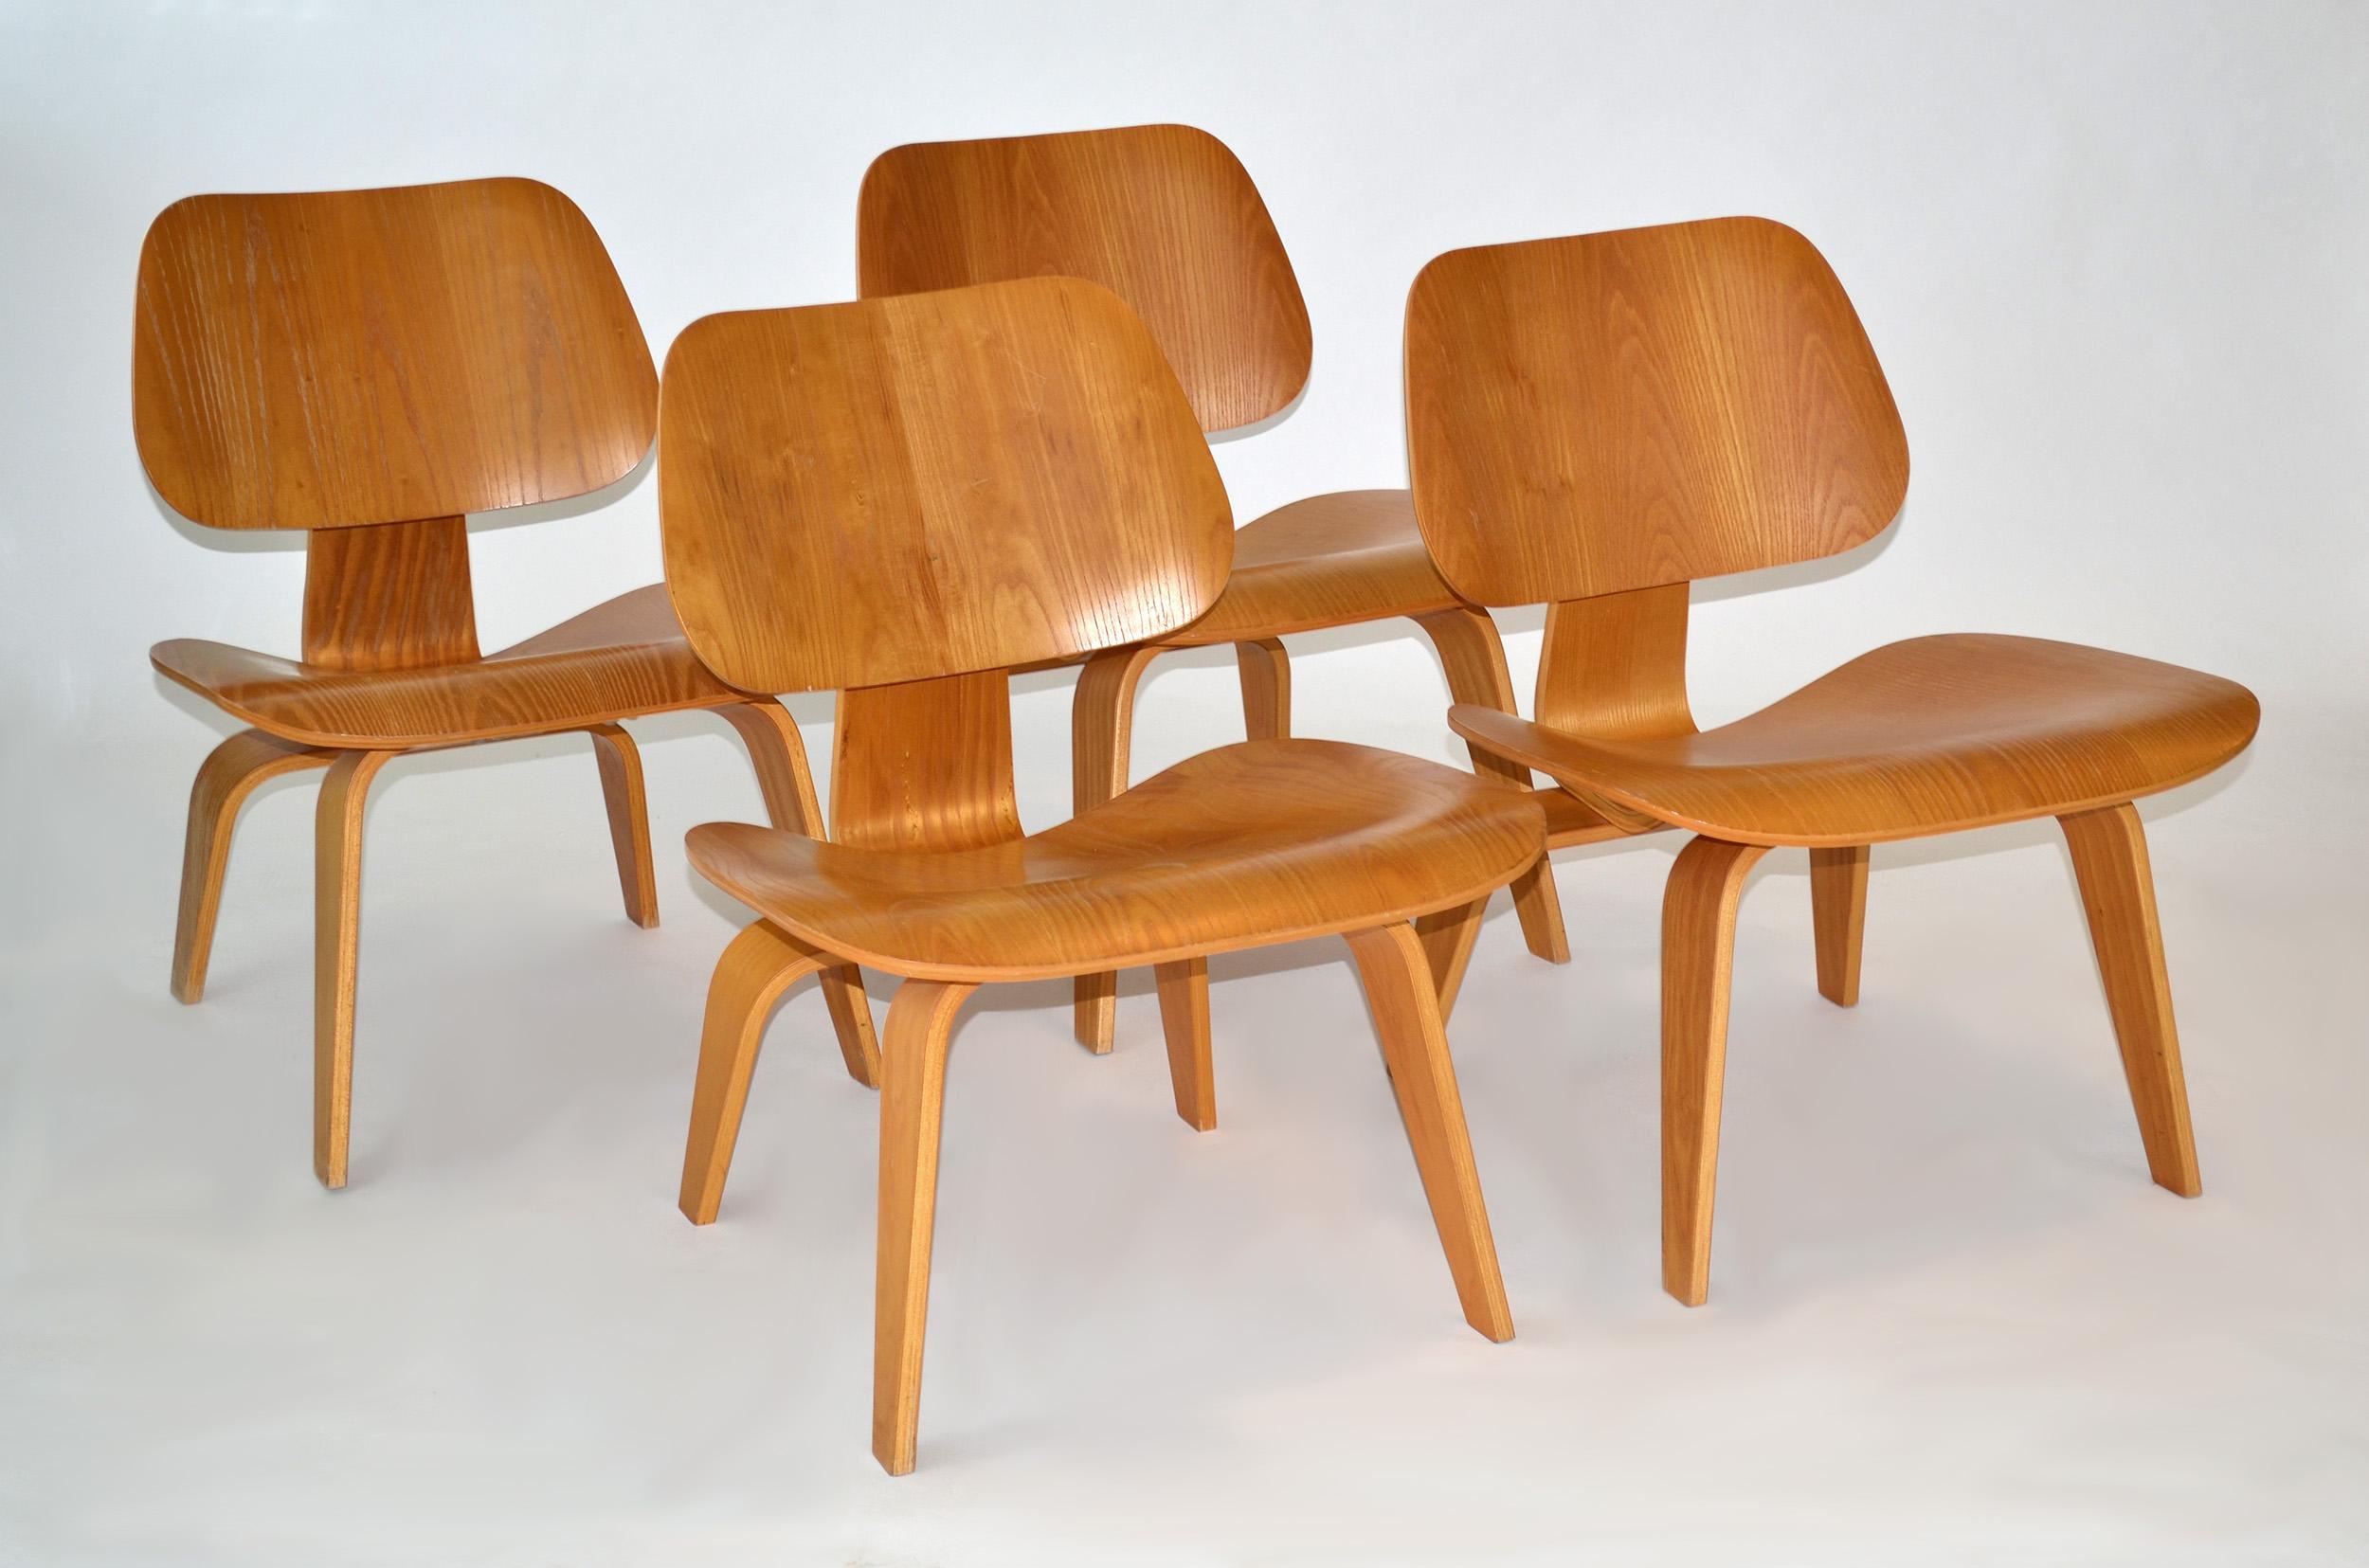 Set of Four Eames LCW plywood lounge chairs for Herman Miller c. 2002
Molded five-ply seat and backs with eight-ply legs and bracj brace, Rubber shock mounts. Signed. Early 21st century production. Price is for set of four.